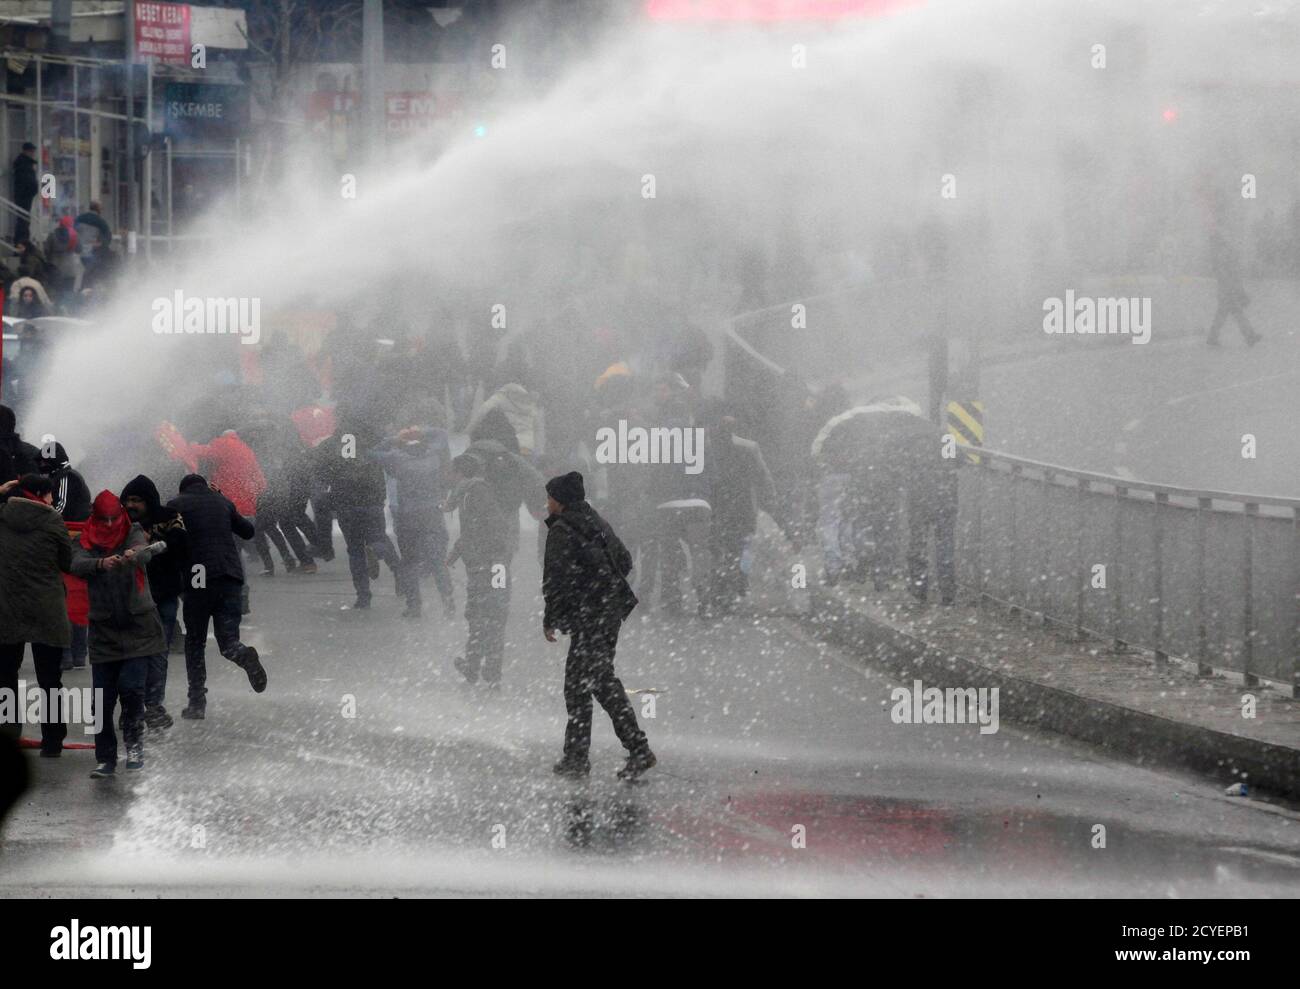 Protesters run from water cannons used by riot police to disperse them during a protest march to commemorate the death of Berkin Elvan, in Istanbul March 11, 2015. Riot police fired water cannons to disperse protesters in Istanbul as they marched to mark the anniversary of the death of Elvan, the 15-year-old boy who suffered a head injury during anti-government protests in Istanbul in 2012, dying on March 11, 2013 after spending months in a coma.   REUTERS/Osman Orsal (TURKEY - Tags: POLITICS CIVIL UNREST CRIME LAW) Stock Photo